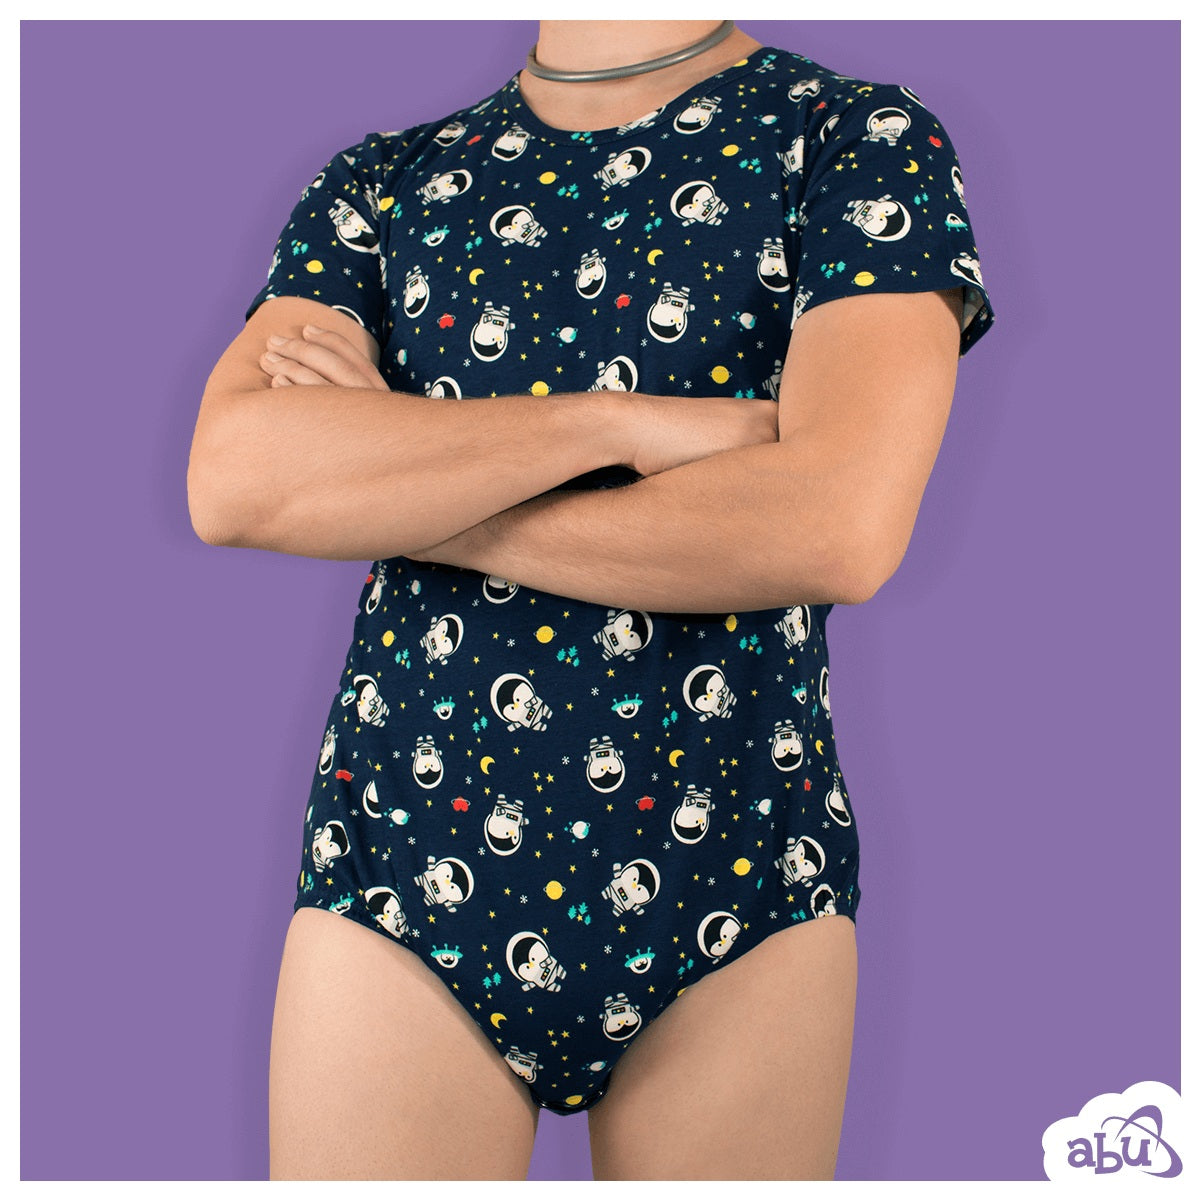 Front view of model wearing space penguins print diapersuit with disposable diaper worn underneath.